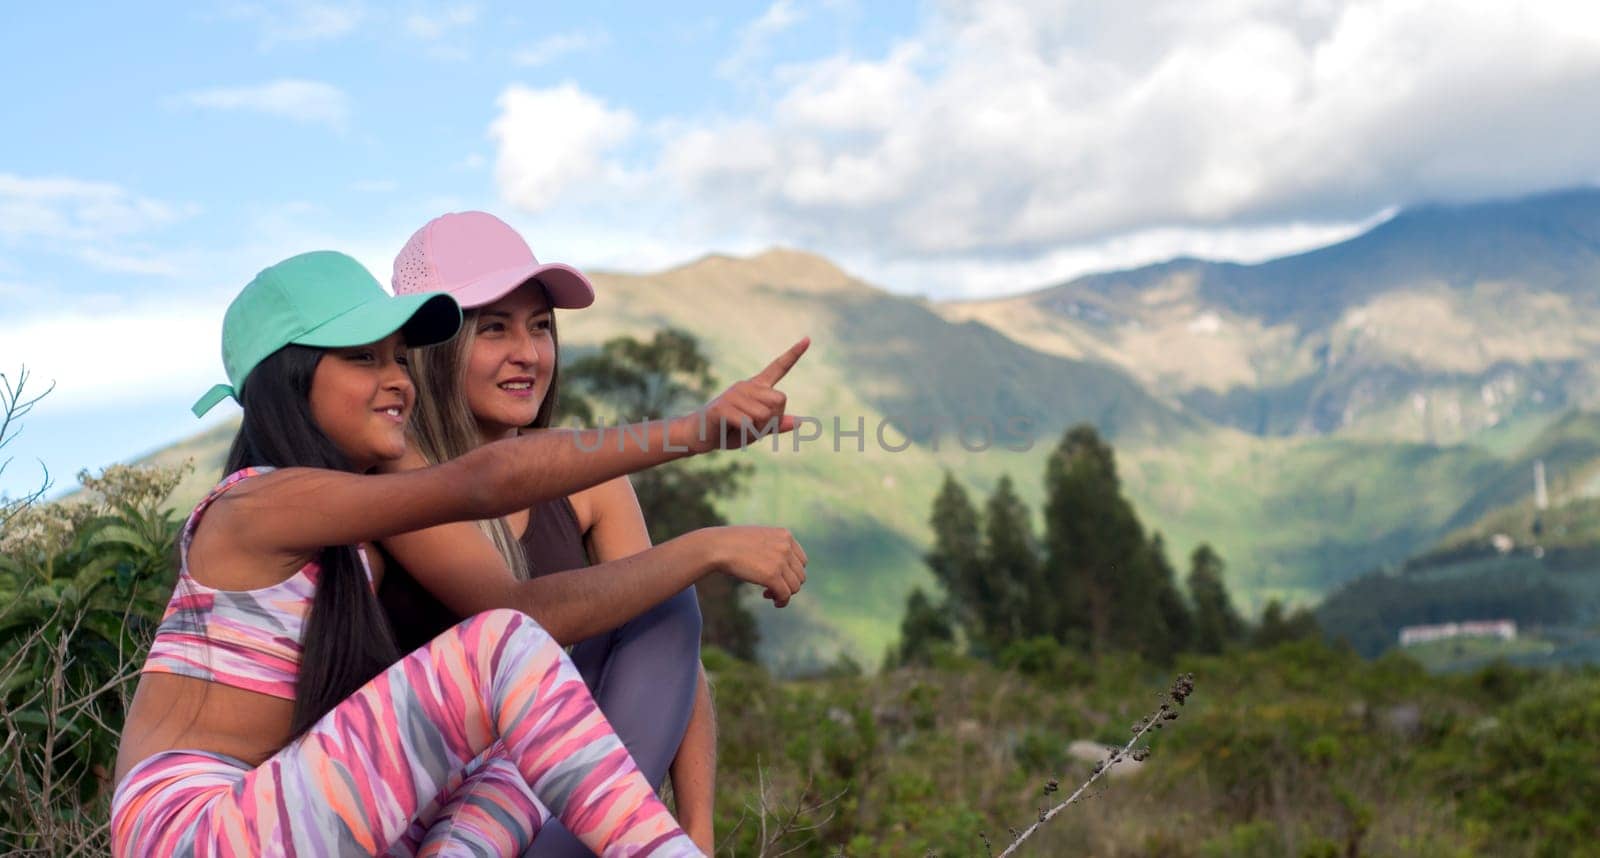 copyspace of mom and daughter in a healthy lifestyle happy and carefree together pointing to a place by Raulmartin